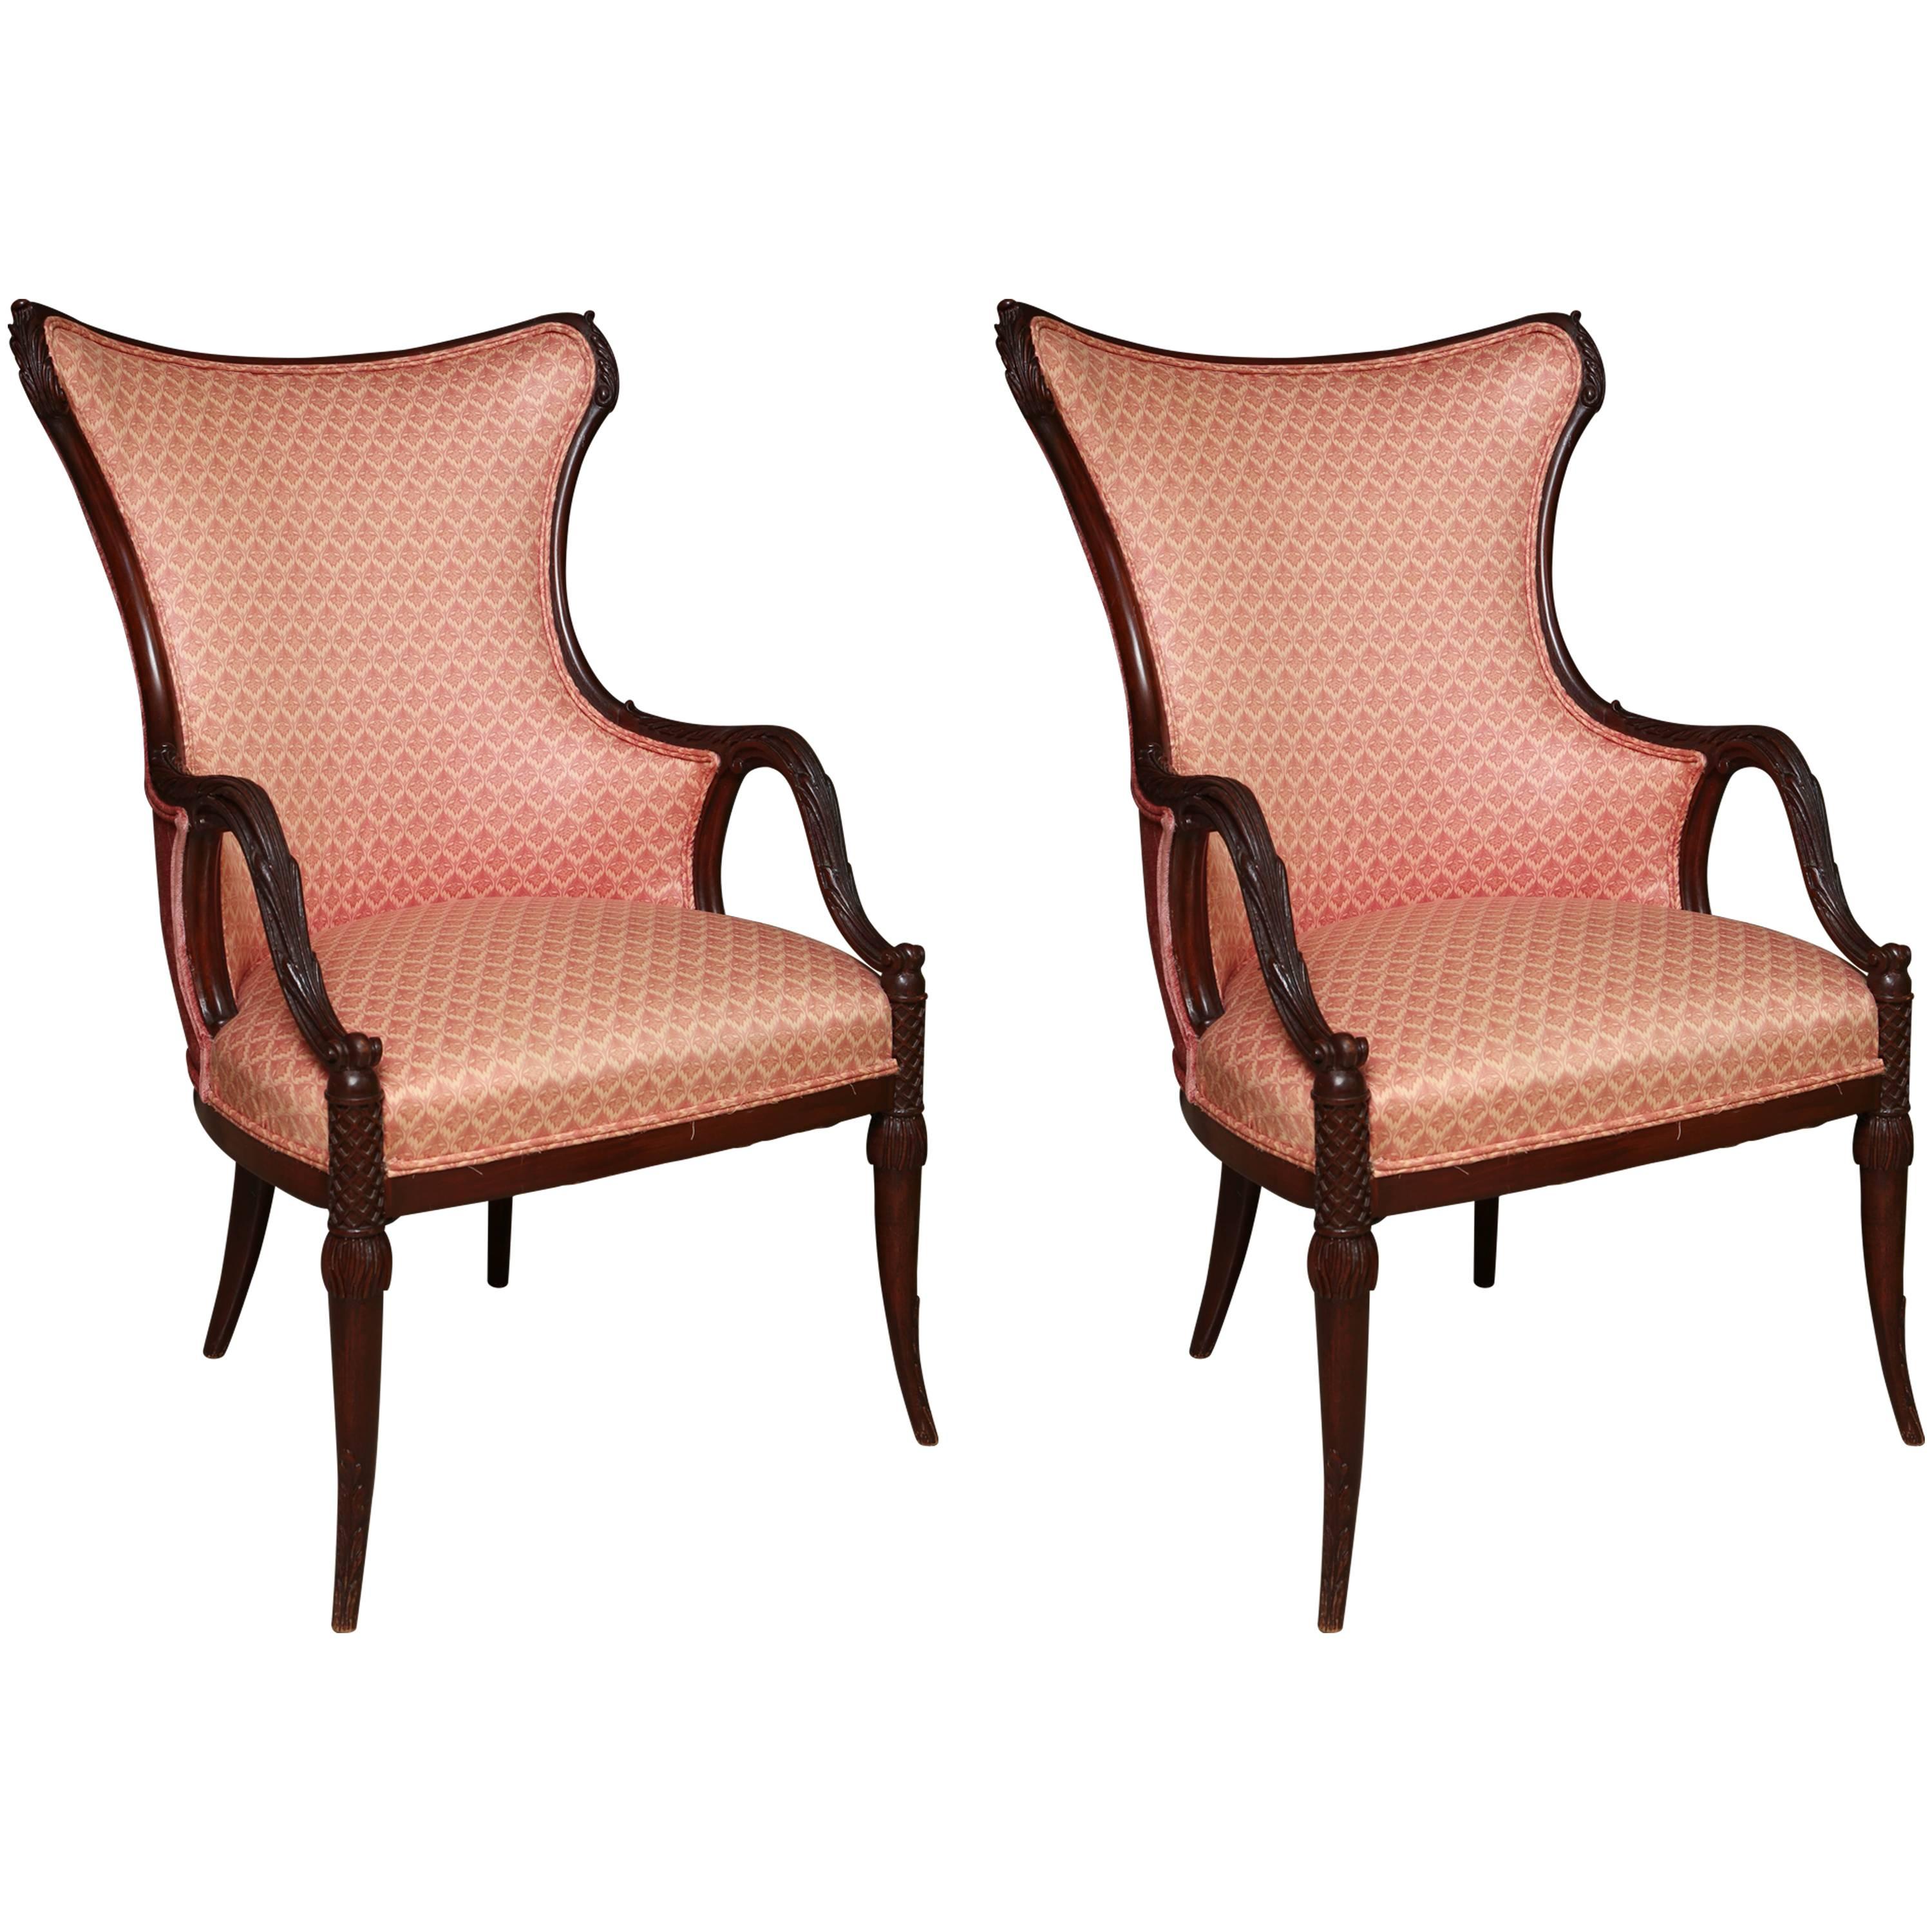 Superb Pair of 1920s Art Deco Style Mahogany Armchairs Chairs